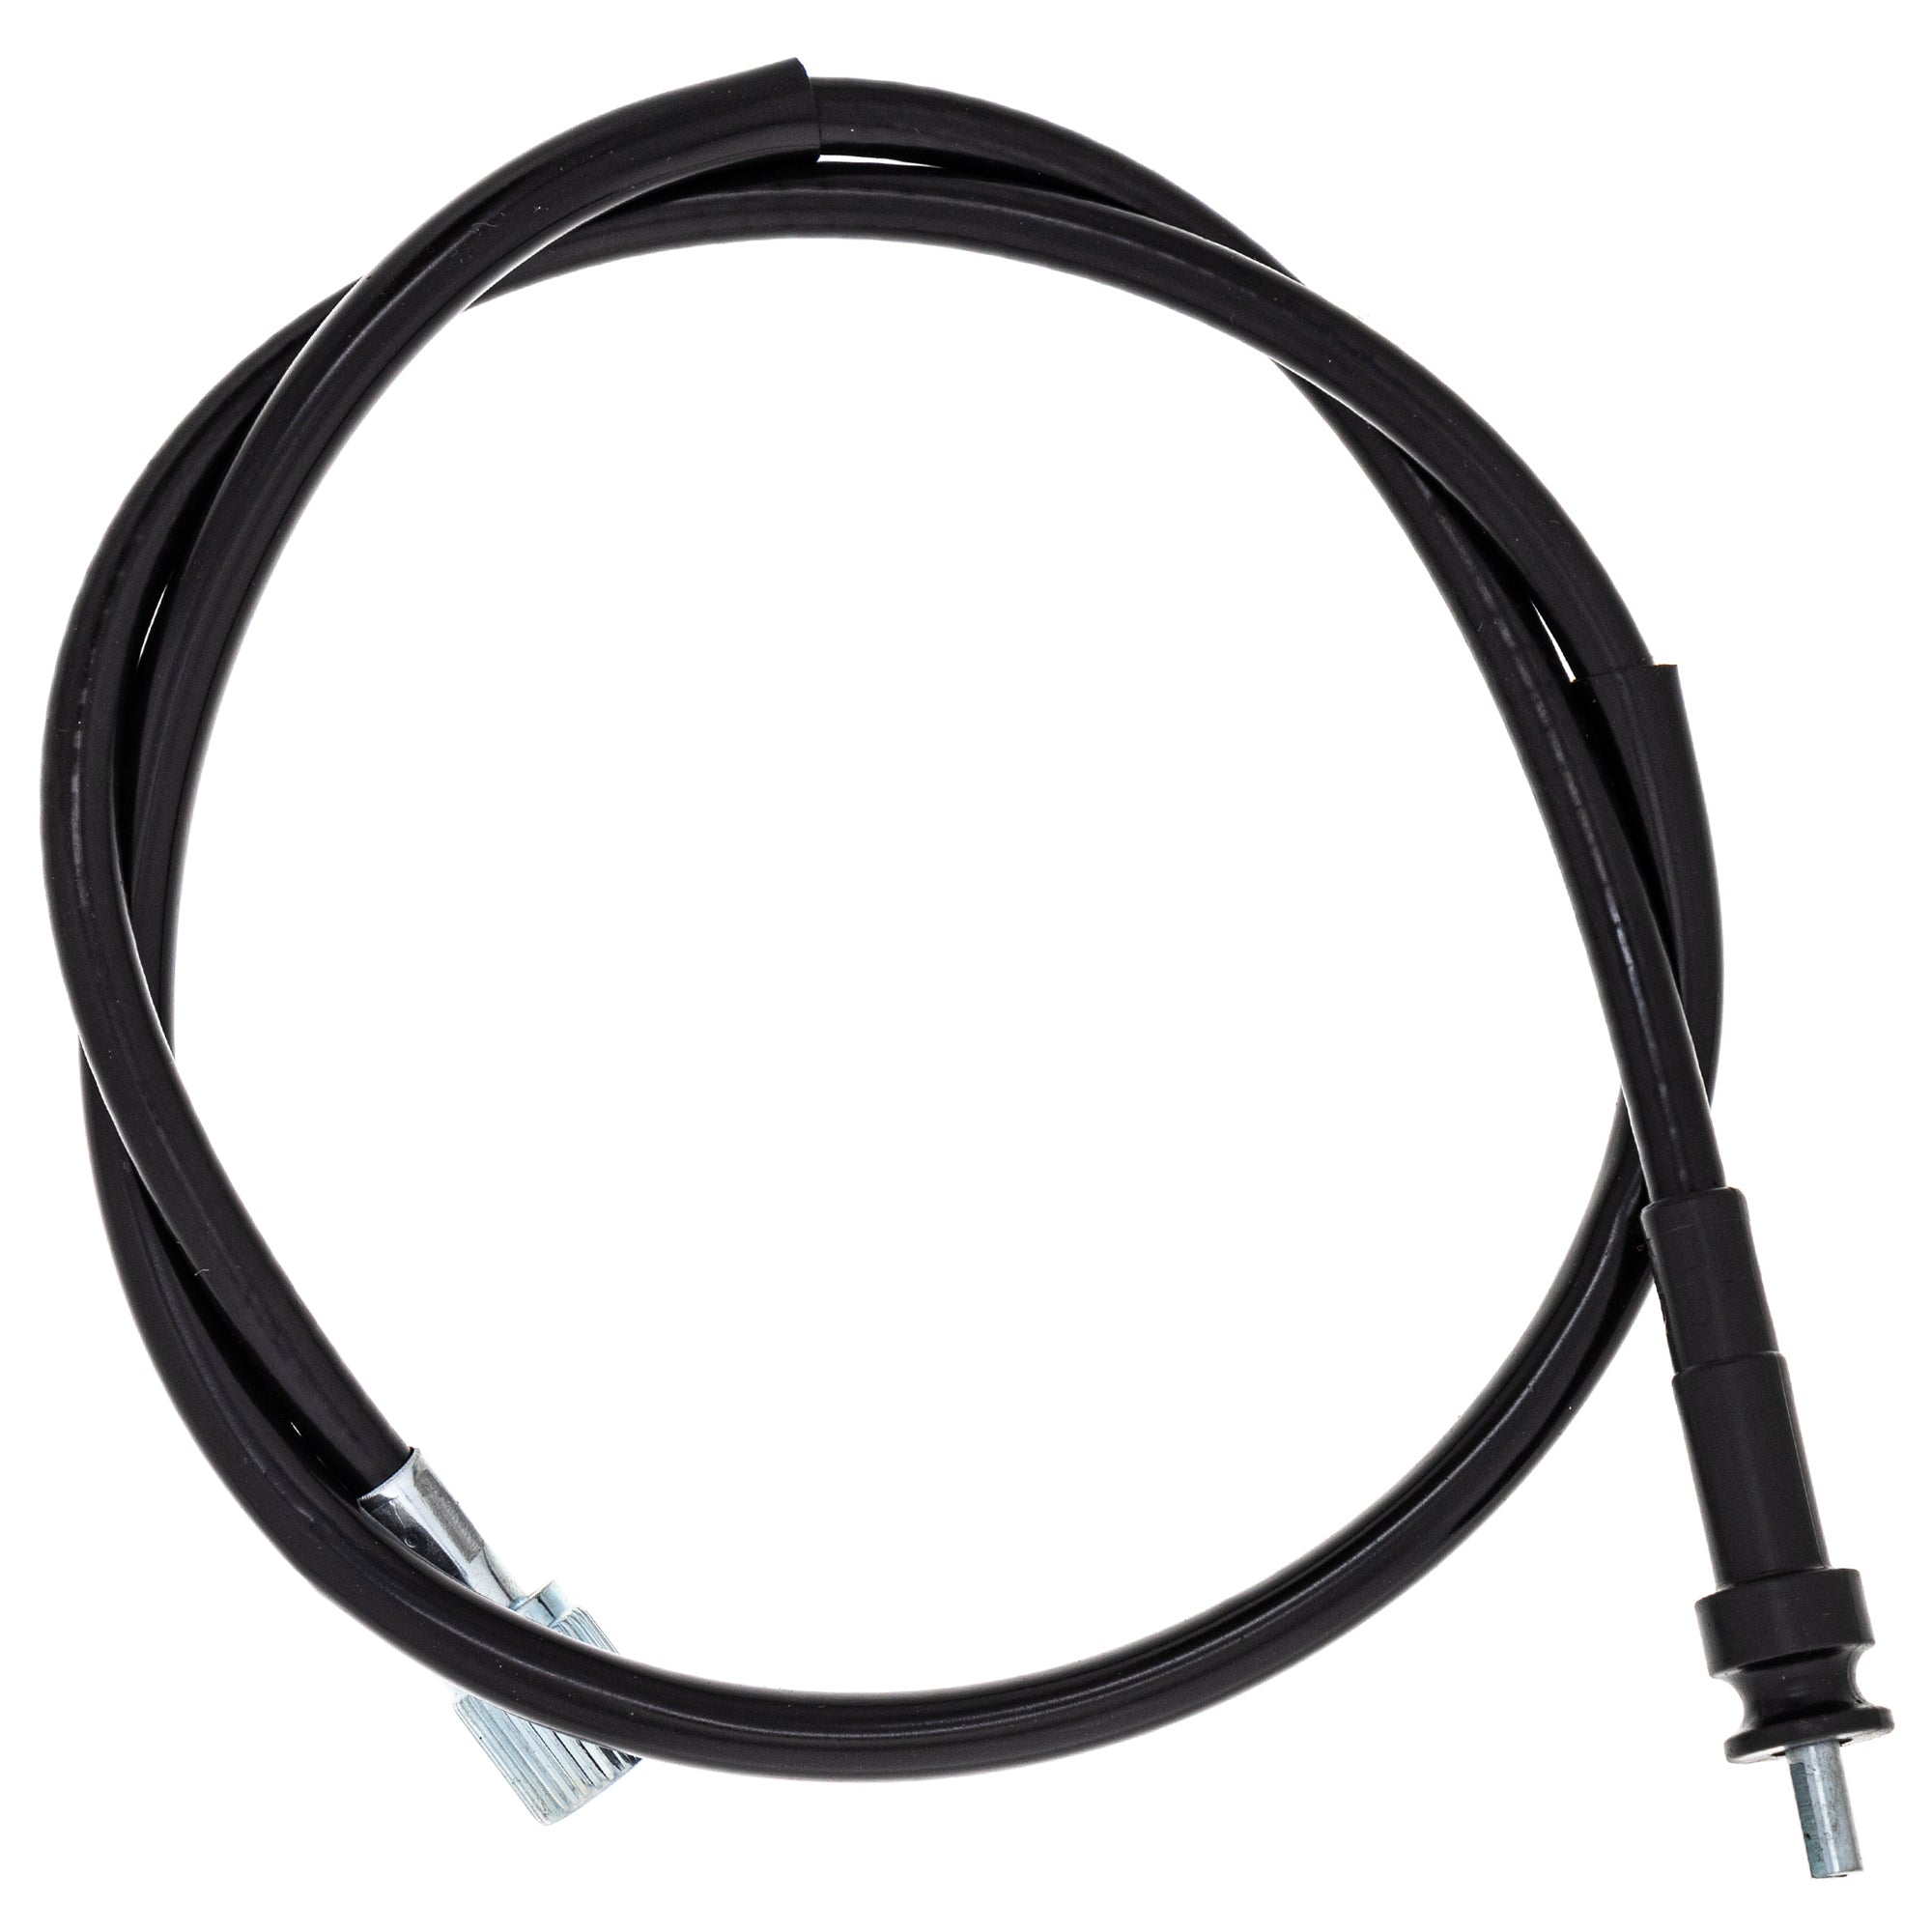 Tachometer Cable for zOTHER Nighthawk Hondamatic Hawk NICHE 519-CCB2470L